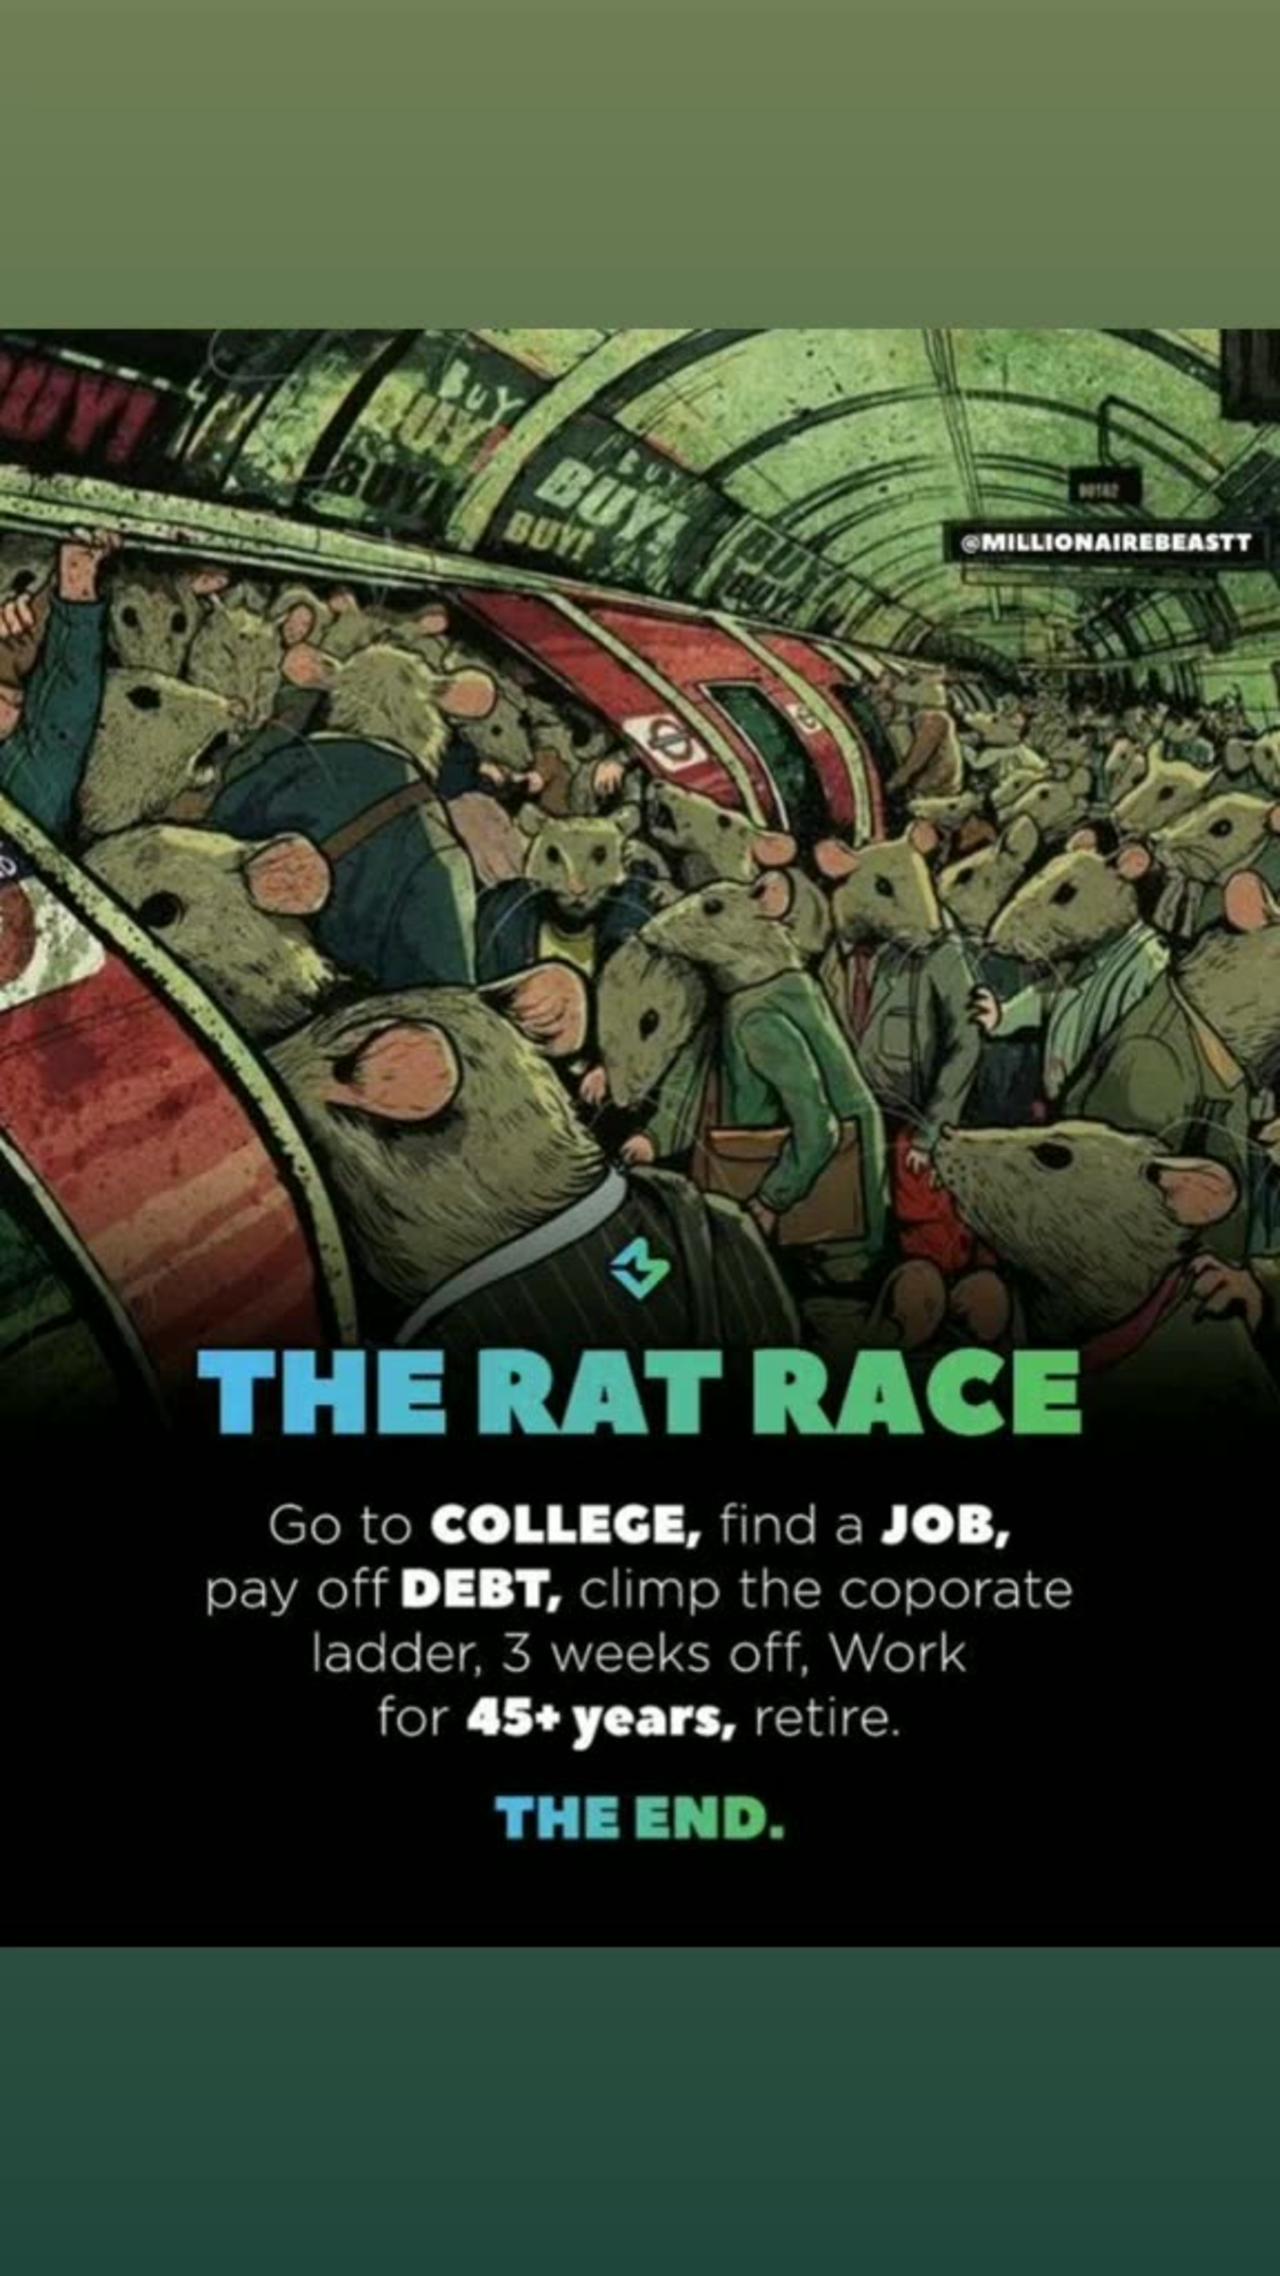 "Breaking Free from the Rat Race: Escaping Debt, 3-Week Work Cycles, and Reclaiming Your Life"